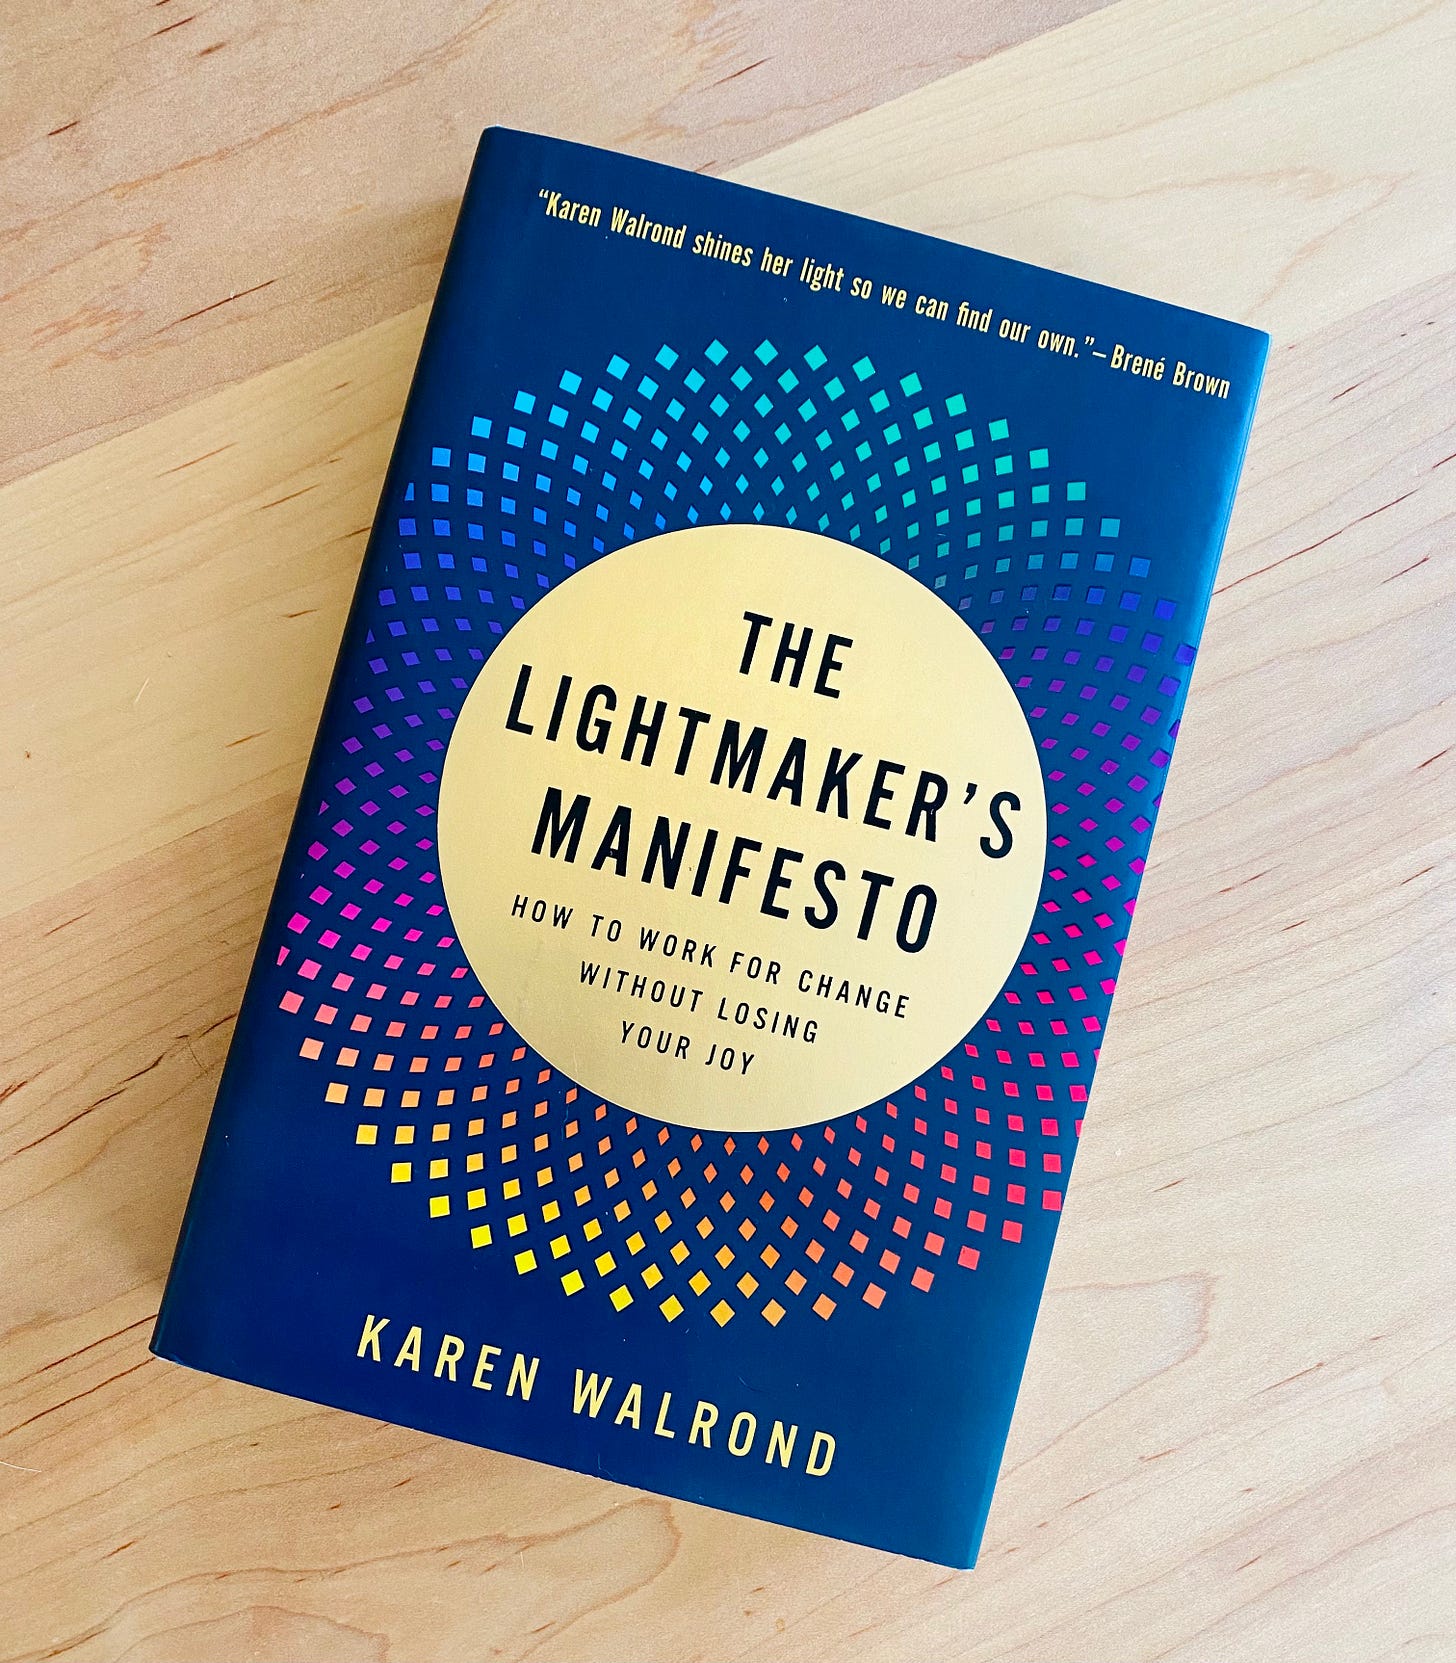 The Lightmaker's Manifesto by Karen Walrond. How to work for change without losing your joy.